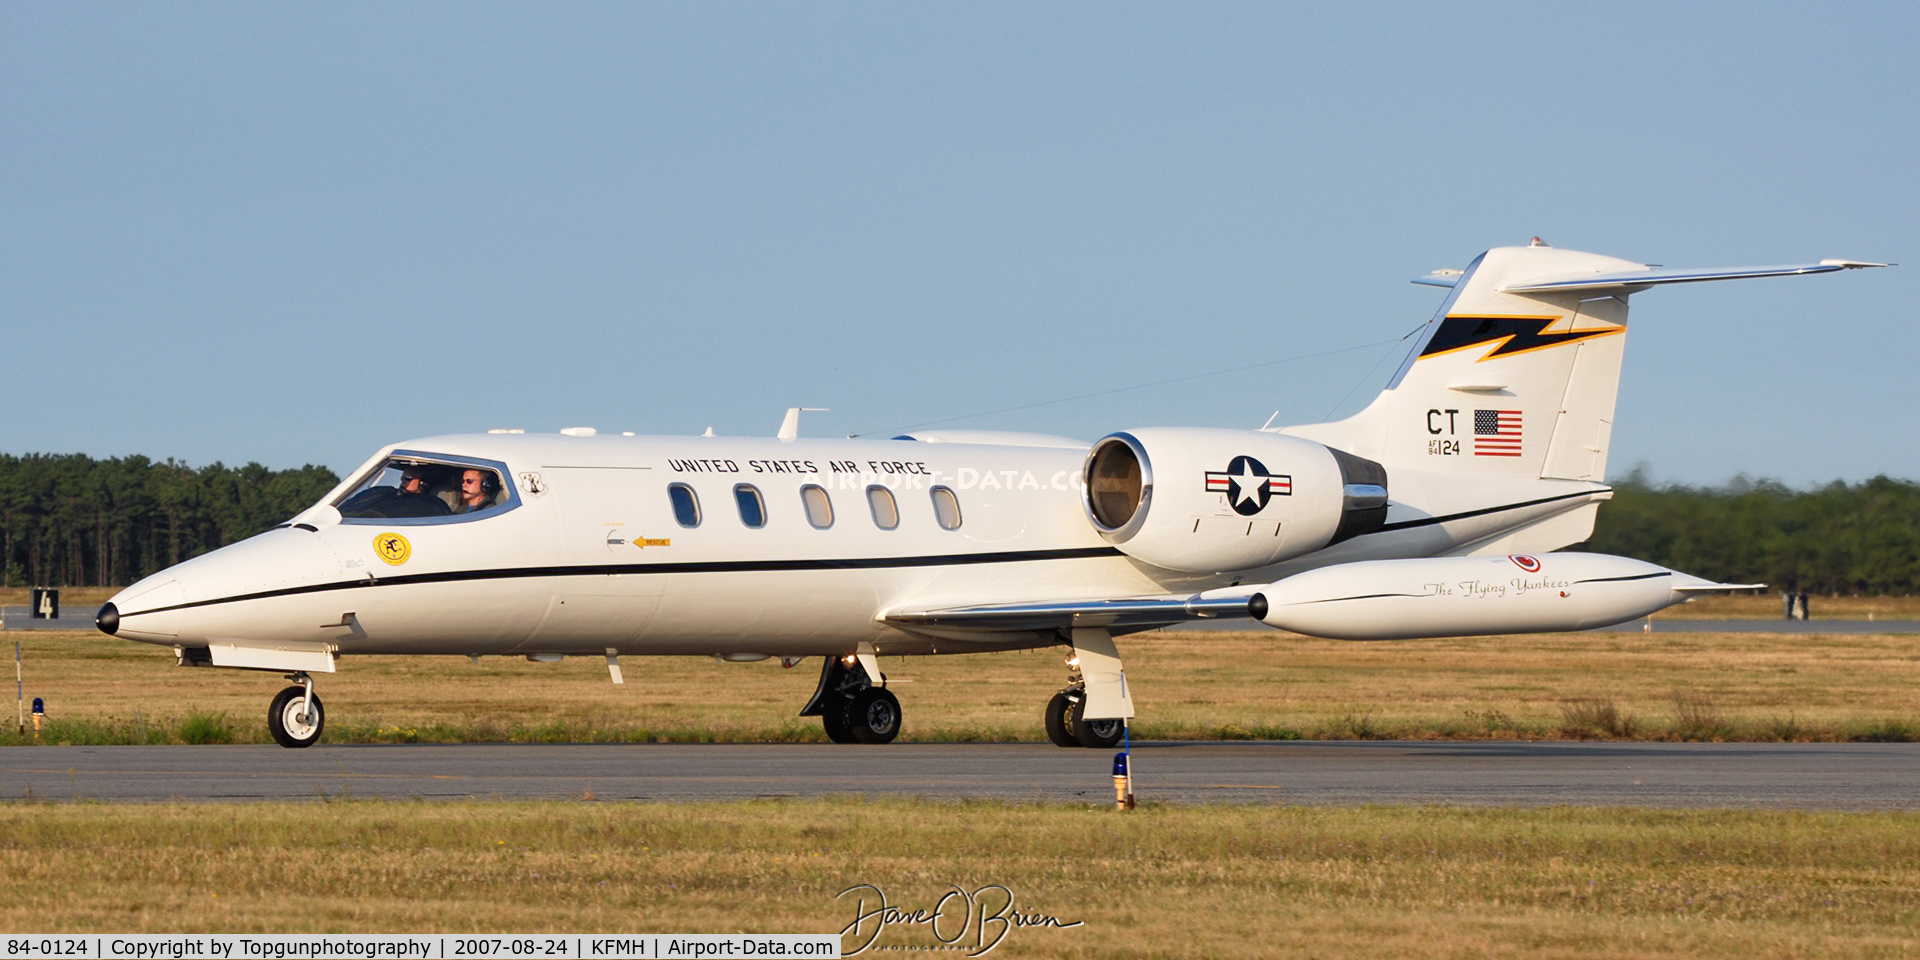 84-0124, 1984 Gates Learjet C-21A C/N 35A-570, 103rd AW before going to C-130H's